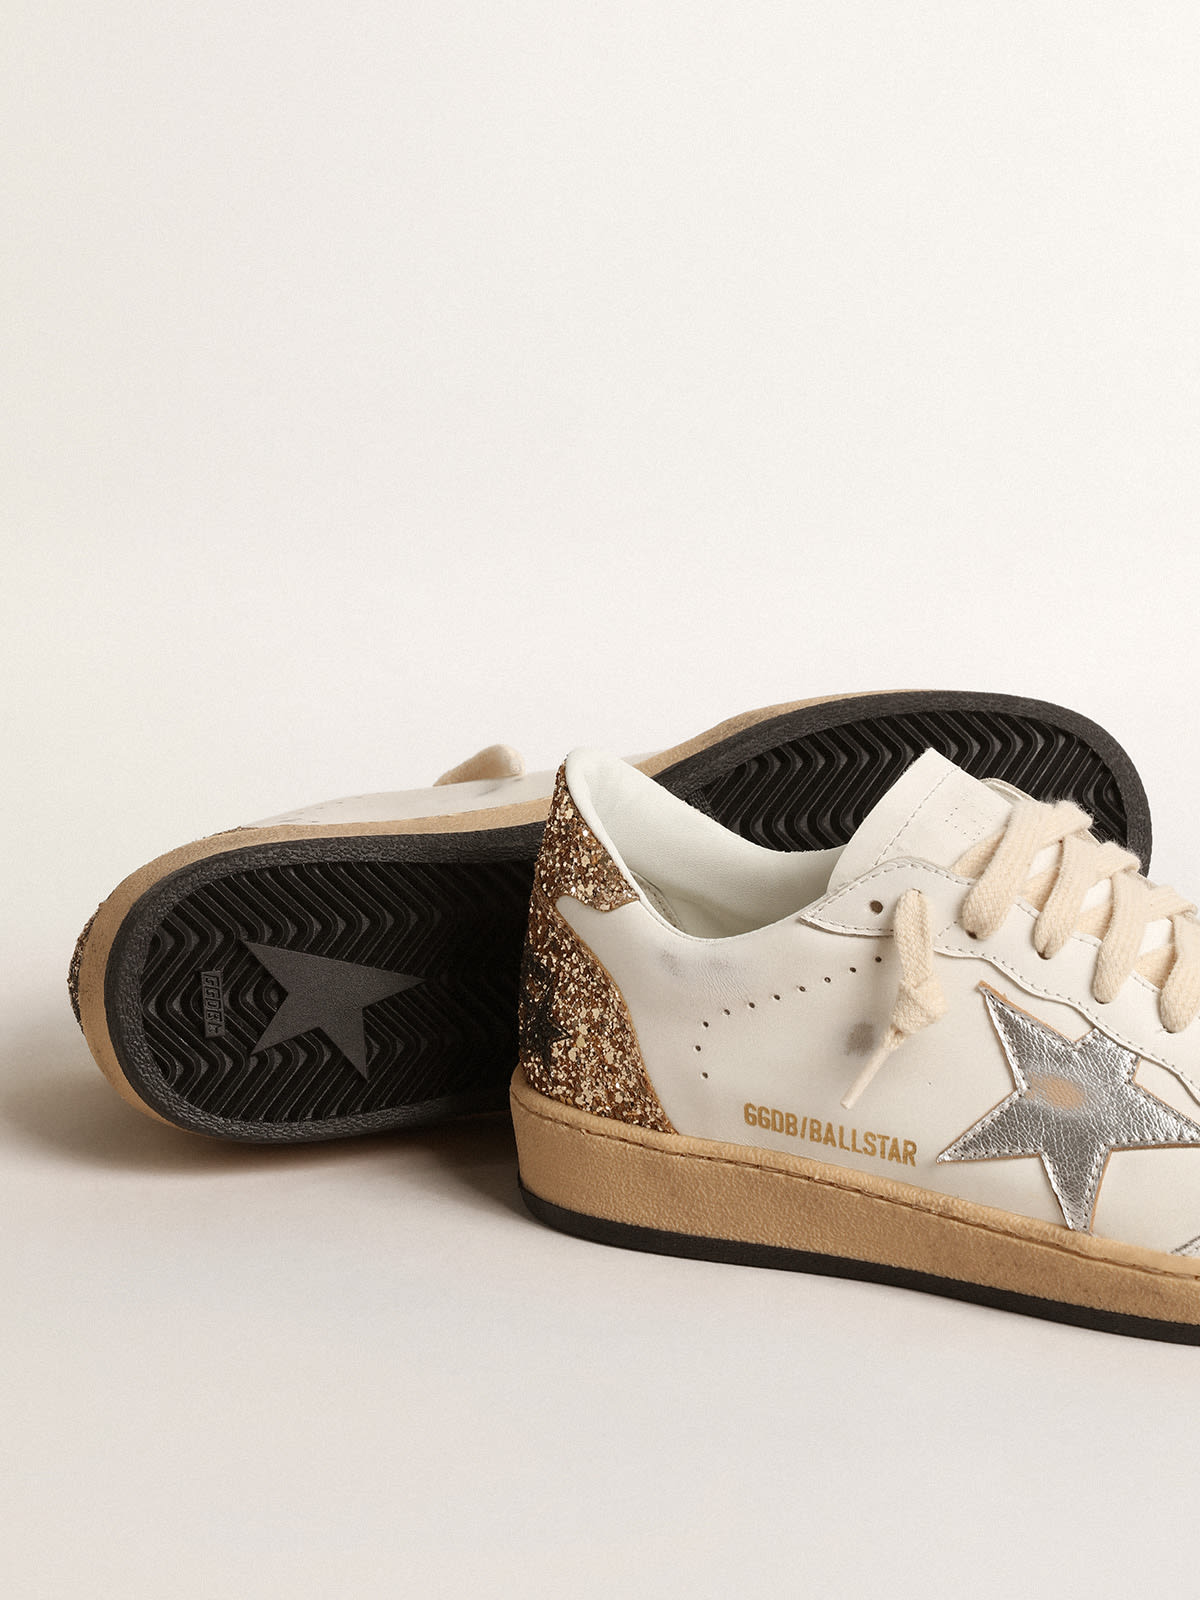 Golden Goose - Ball Star with metallic leather star and glitter heel tab in 